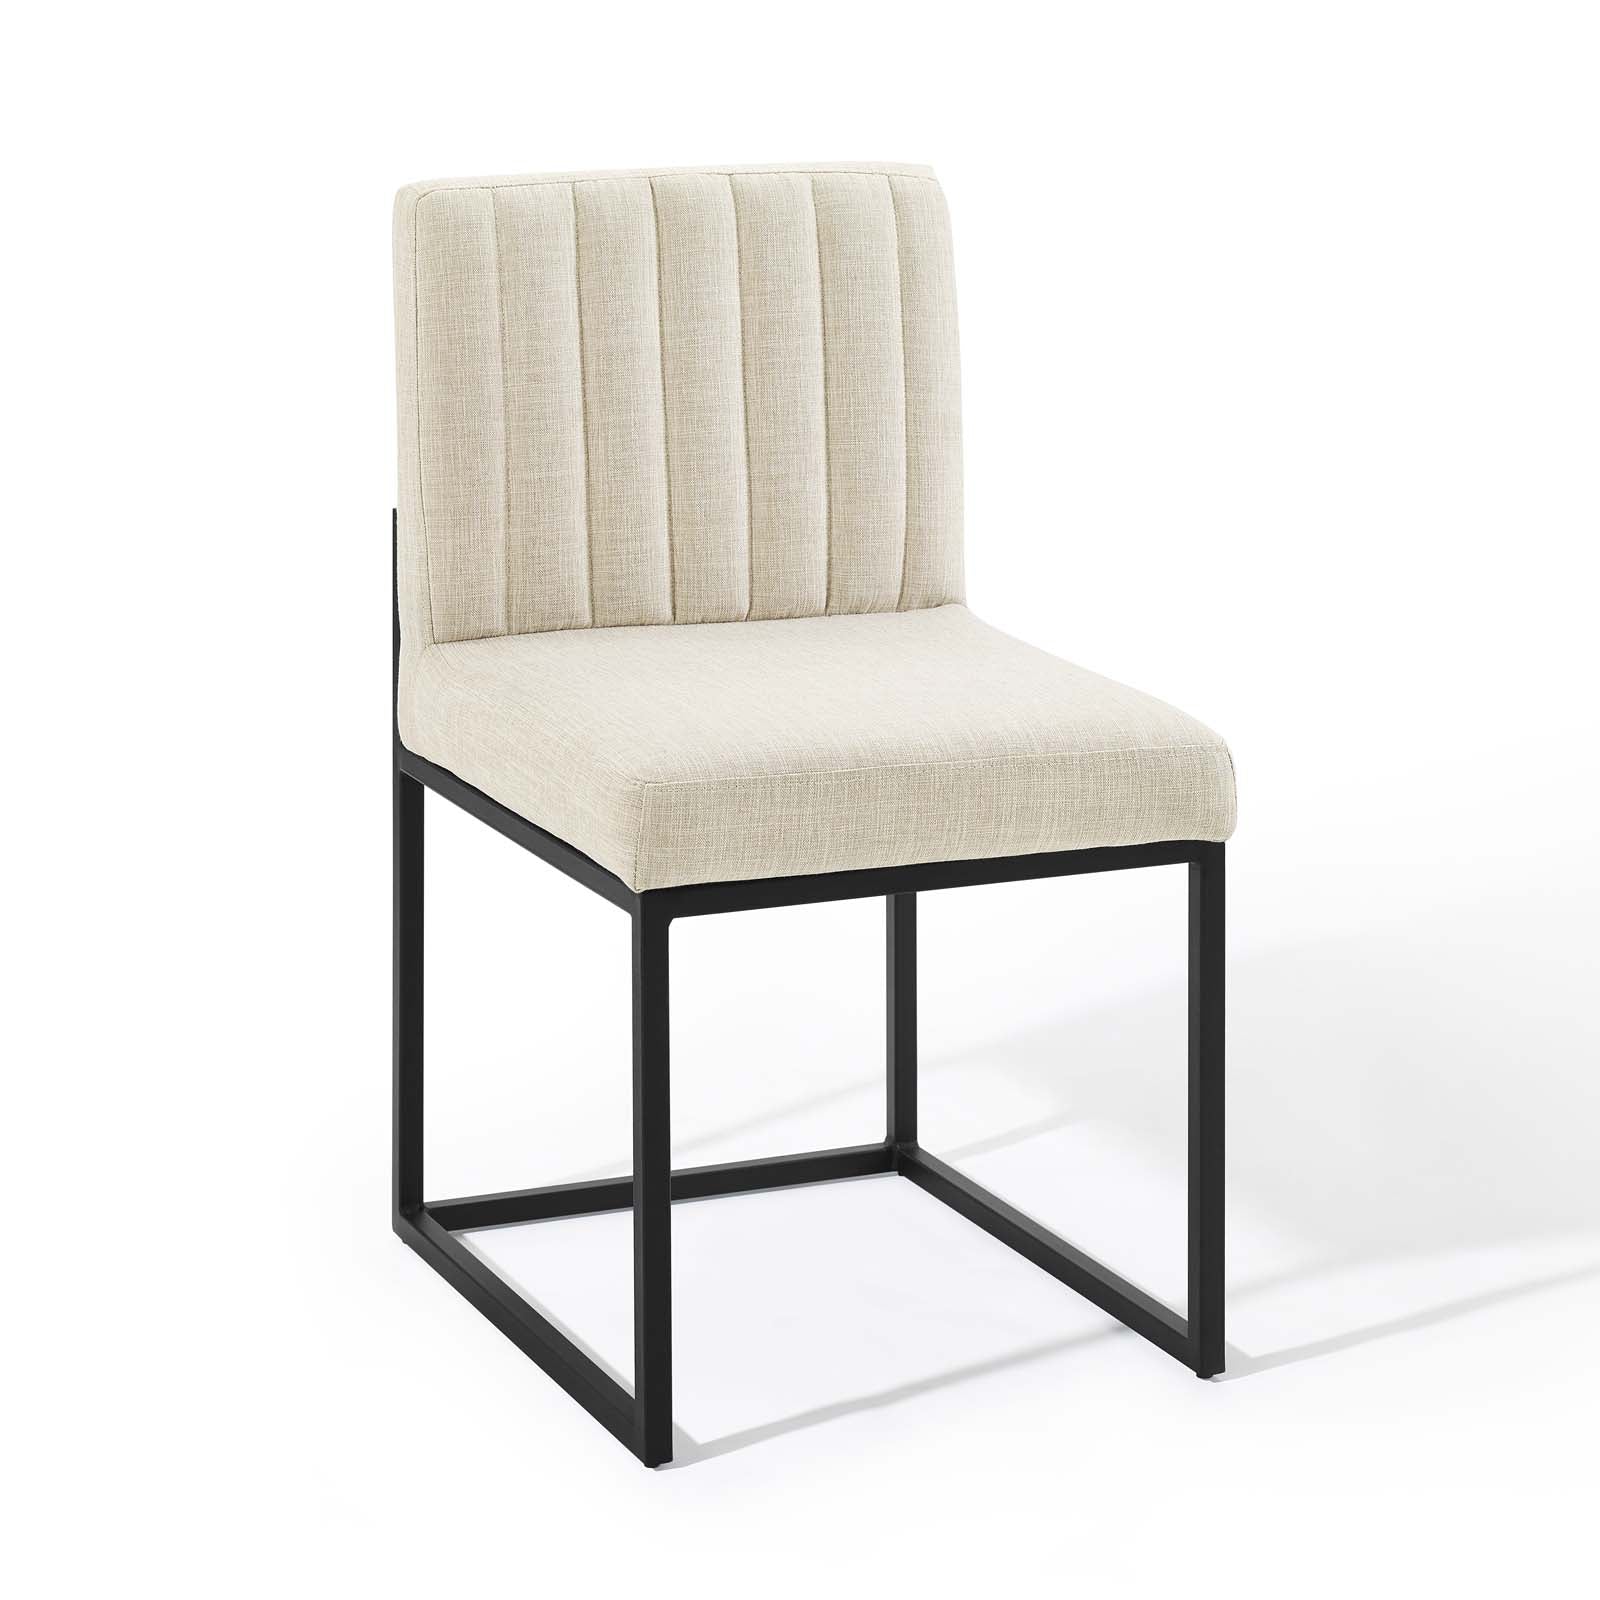 CARRIAGE FABRIC DINING CHAIR- BEIGE